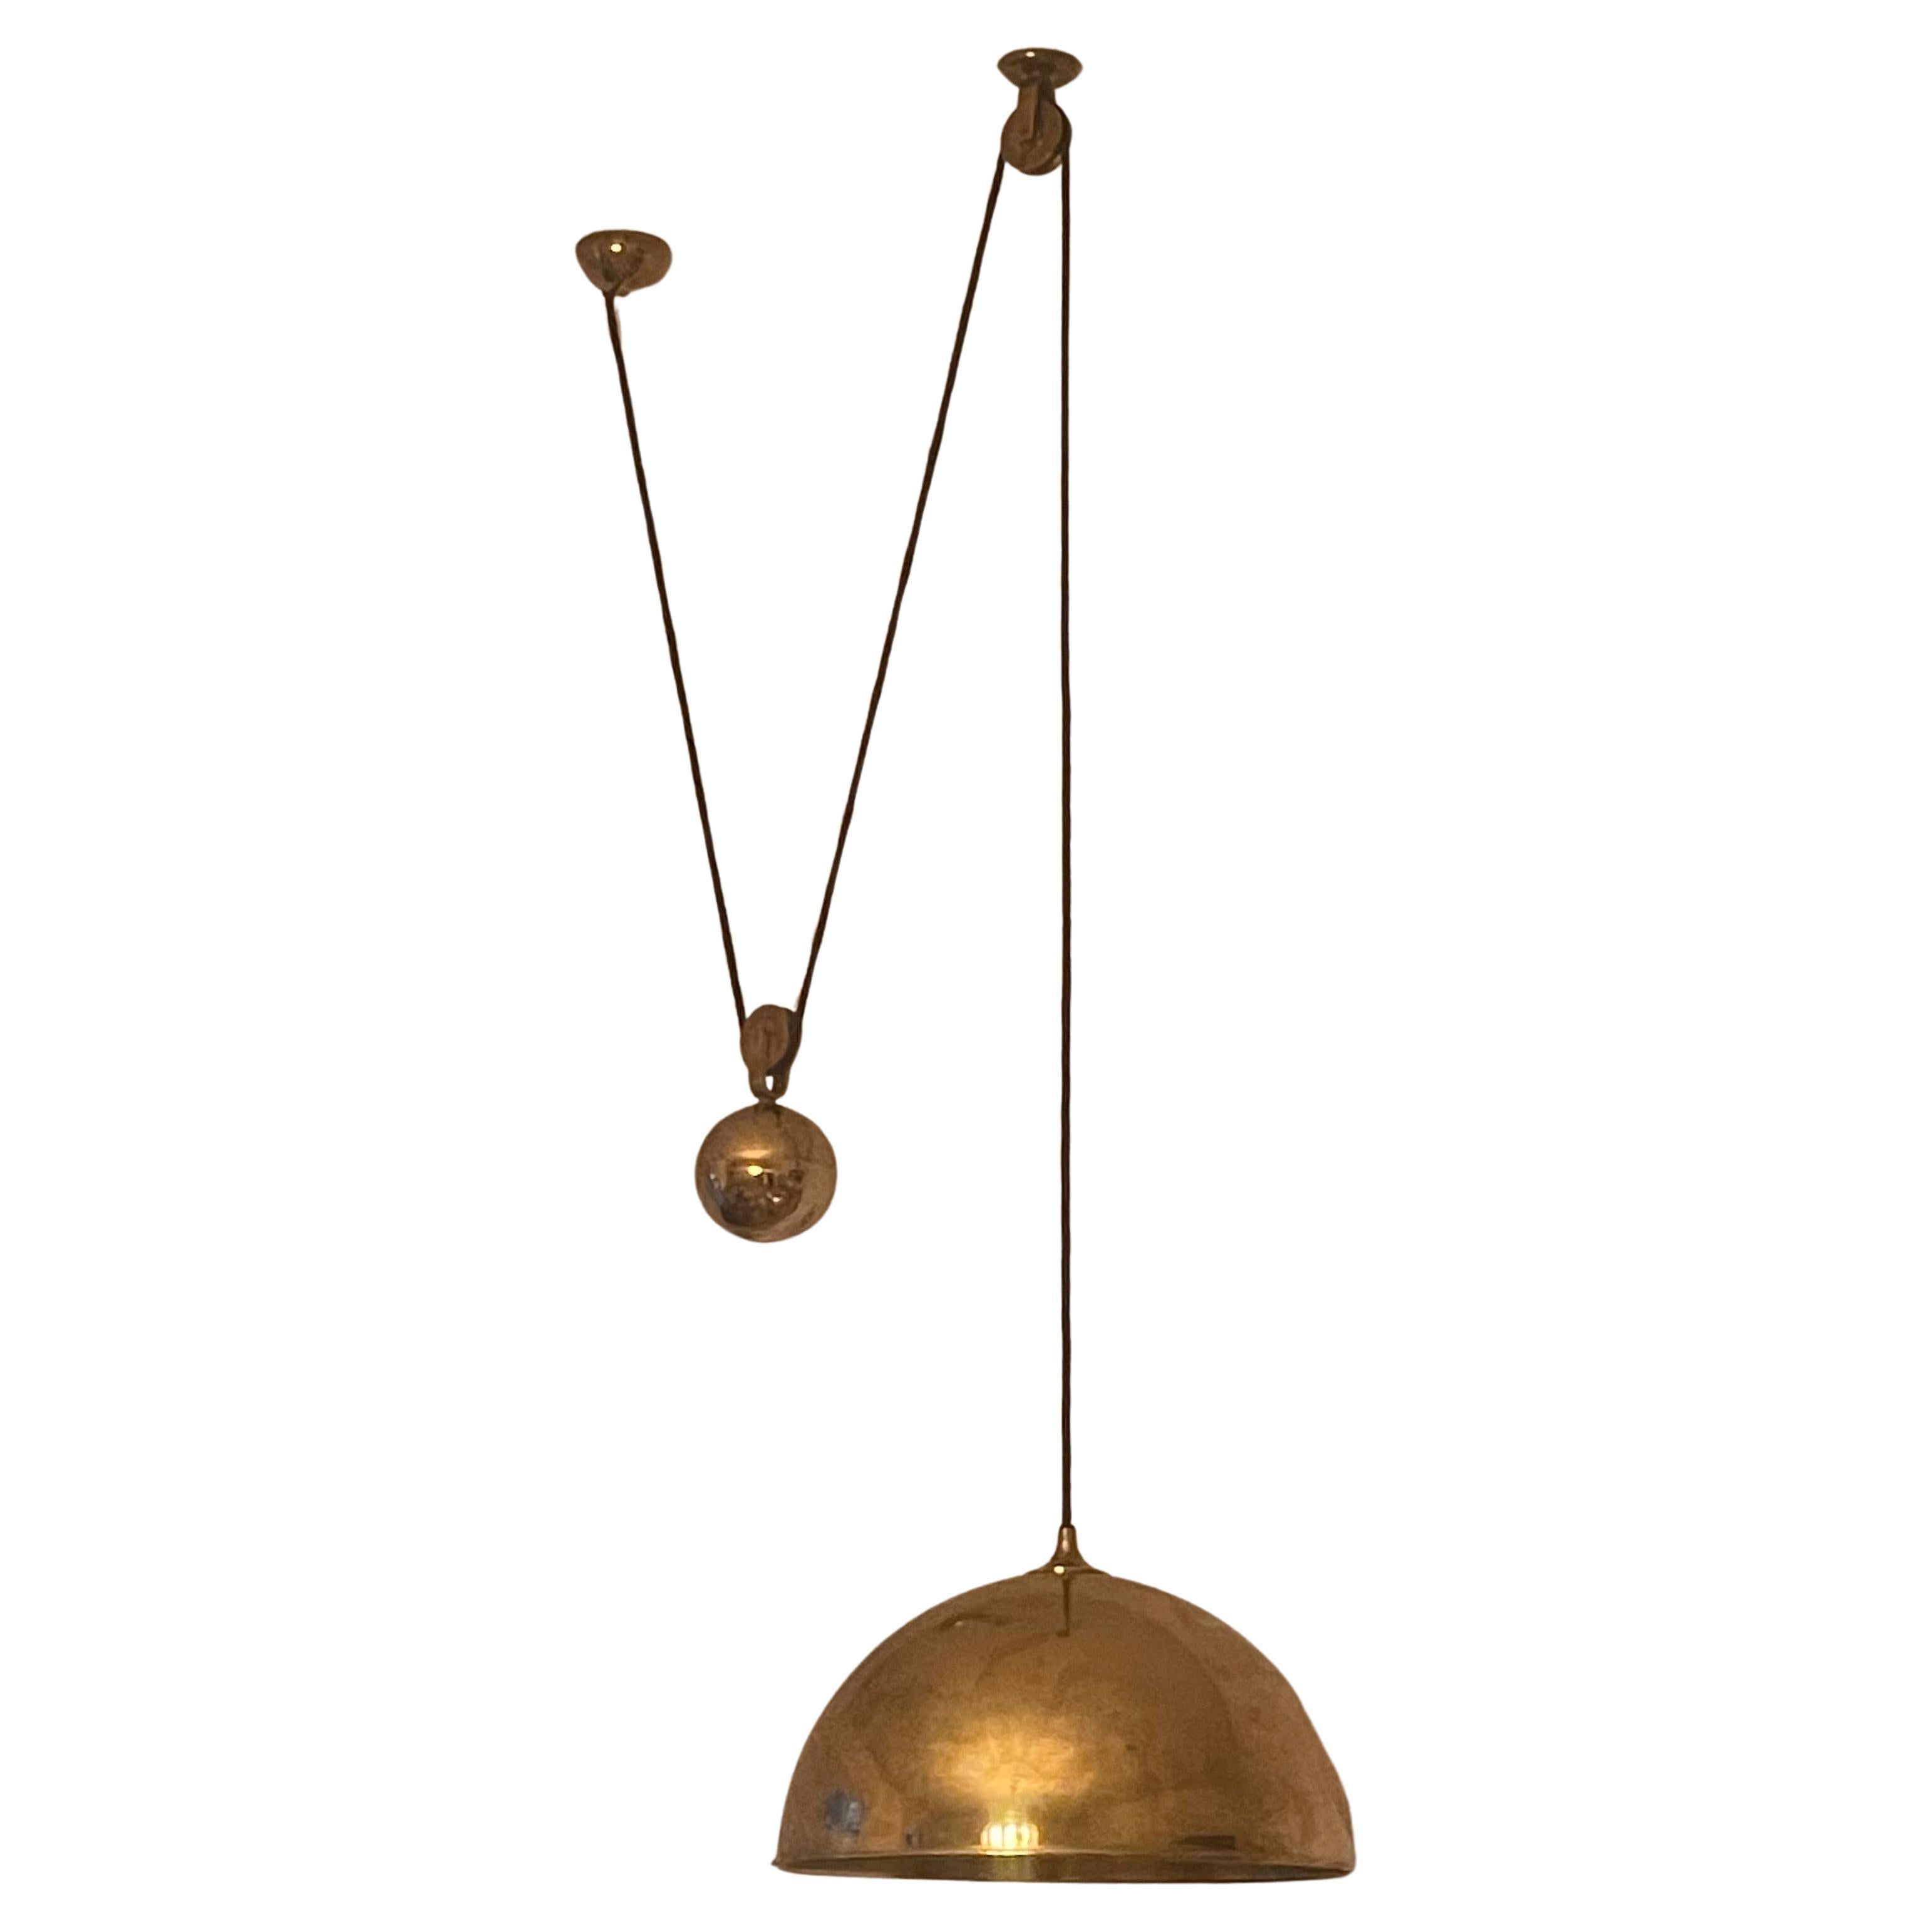 A large polished brass counterbalance pendant with brass ball counter balance pulley system by Florian Schulz, circa 1970s.
The light fixture is adjustable in height. The item is in a great condition and has a delicate patination.
Socket: two E27 or